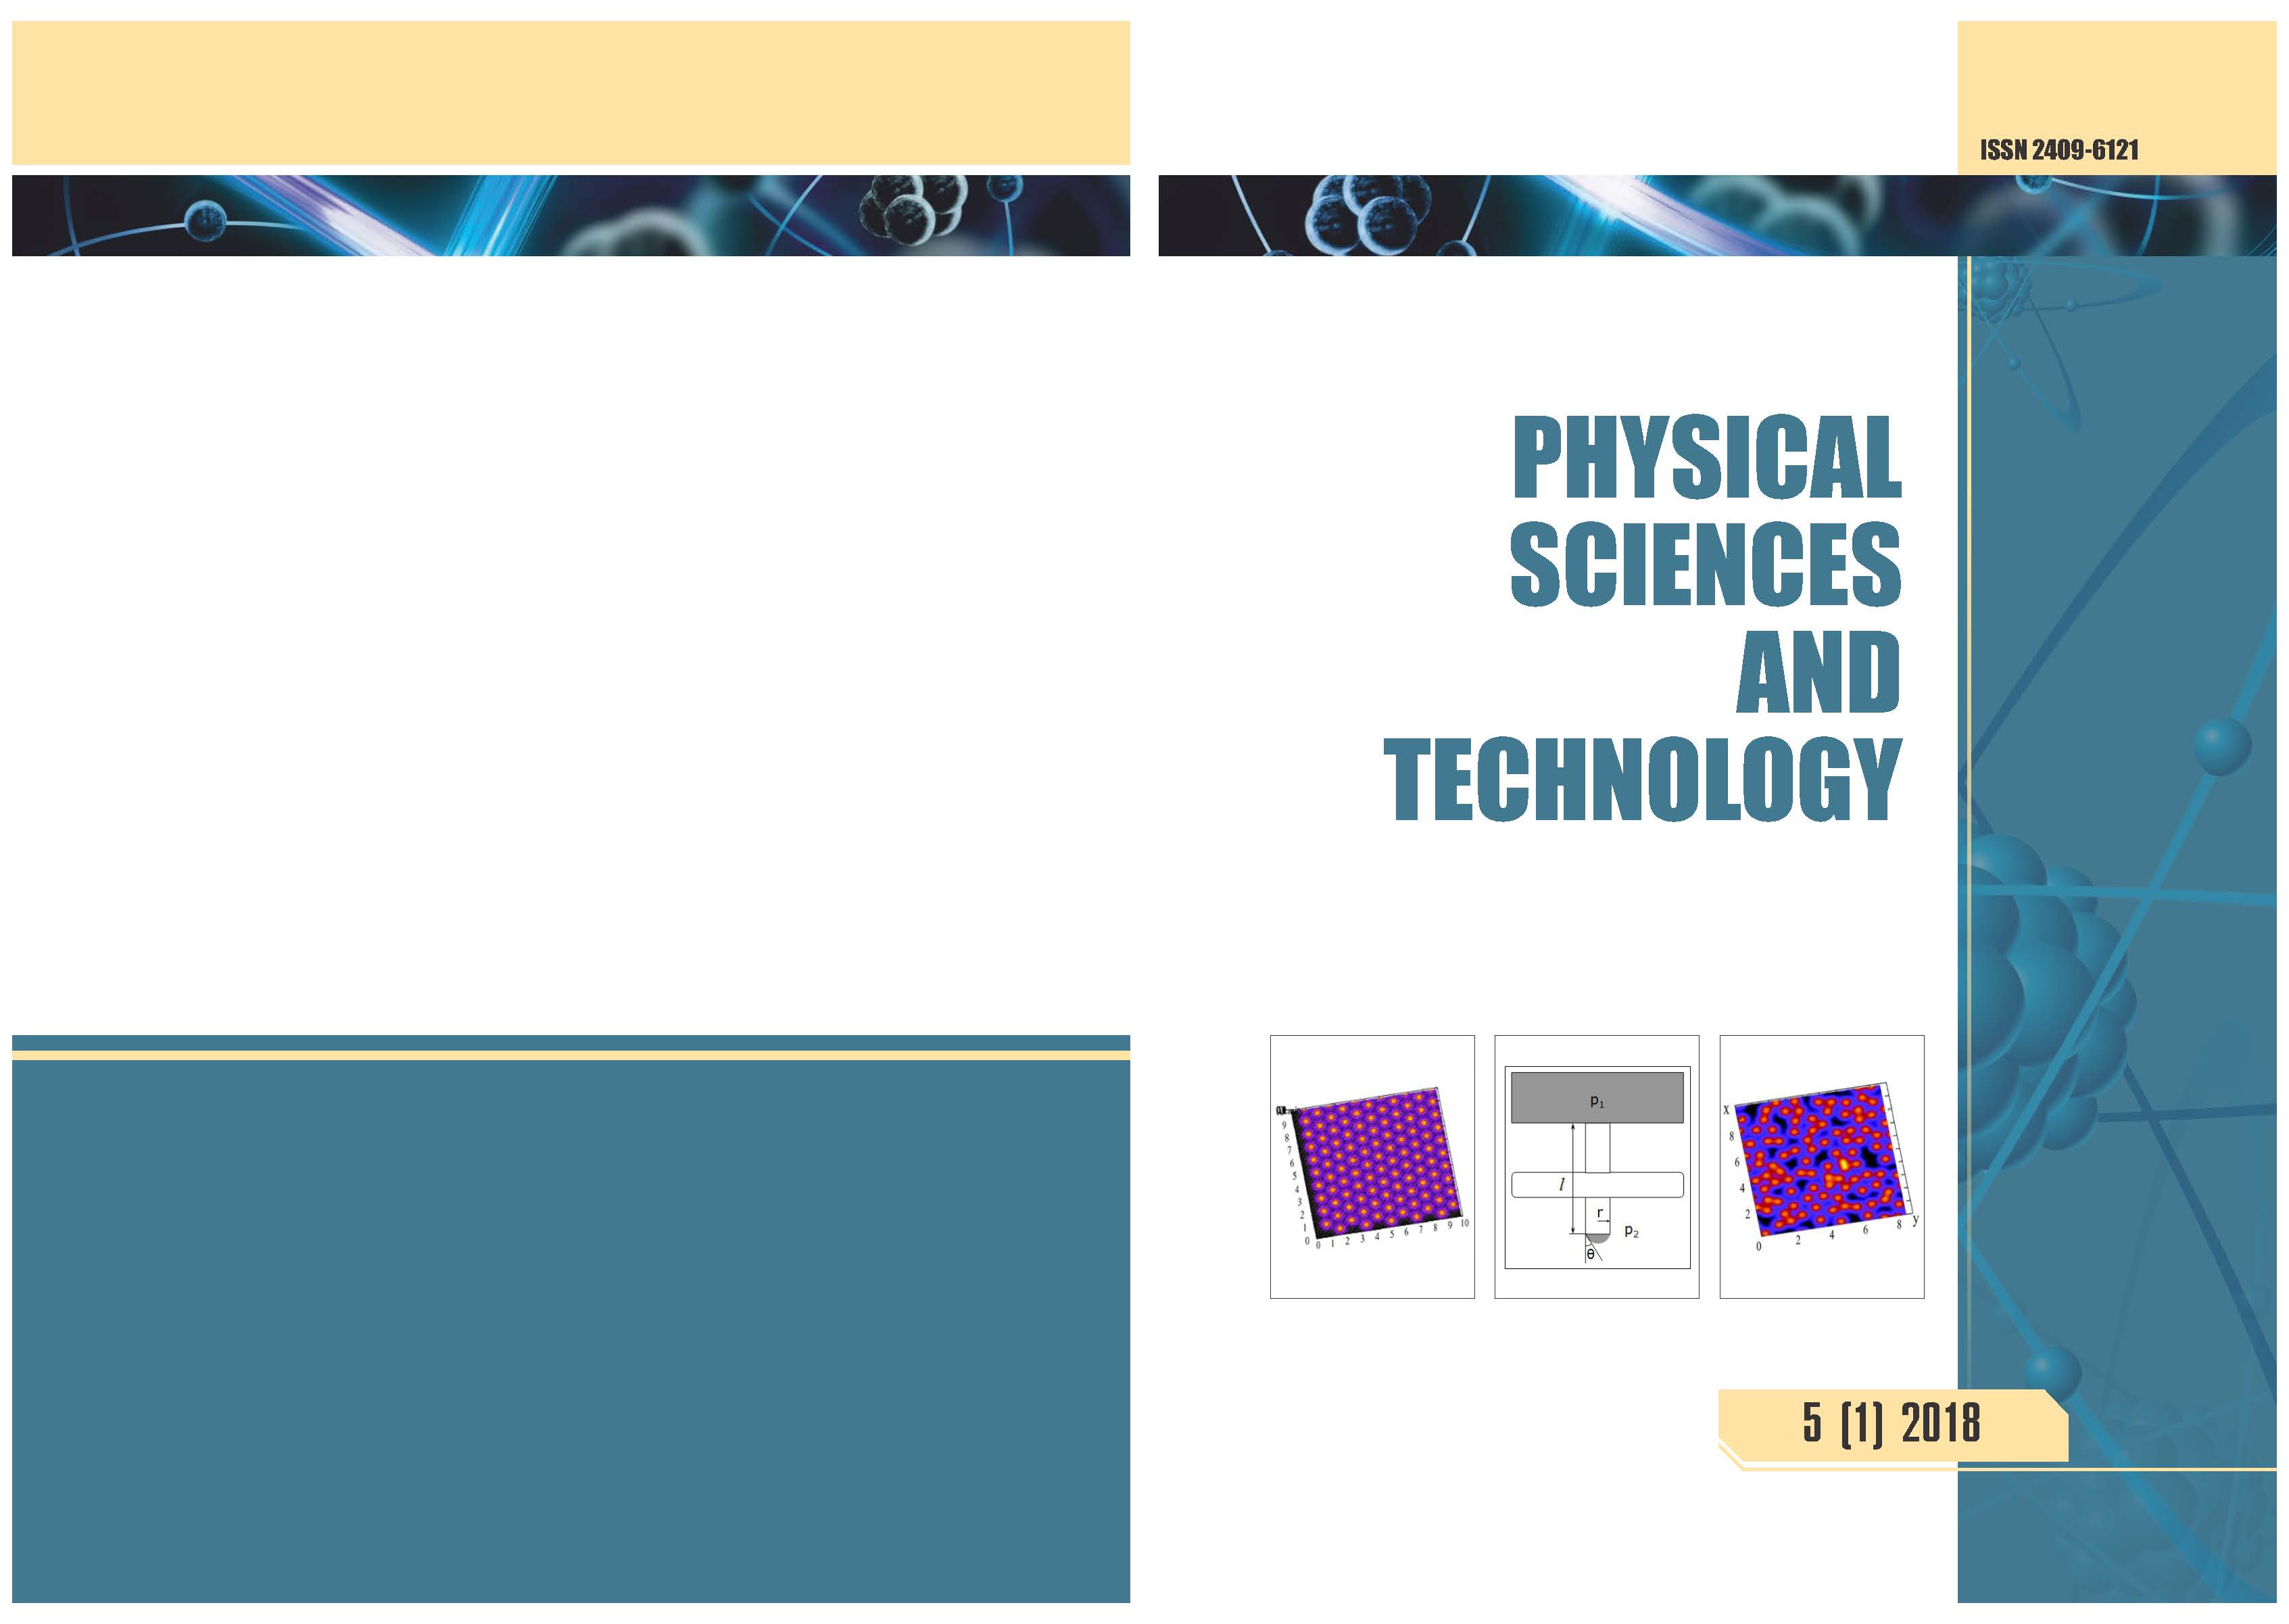 					View Vol. 5 No. 1-2 (2018): PHYSICAL SCIENCES AND TECHNOLOGY
				